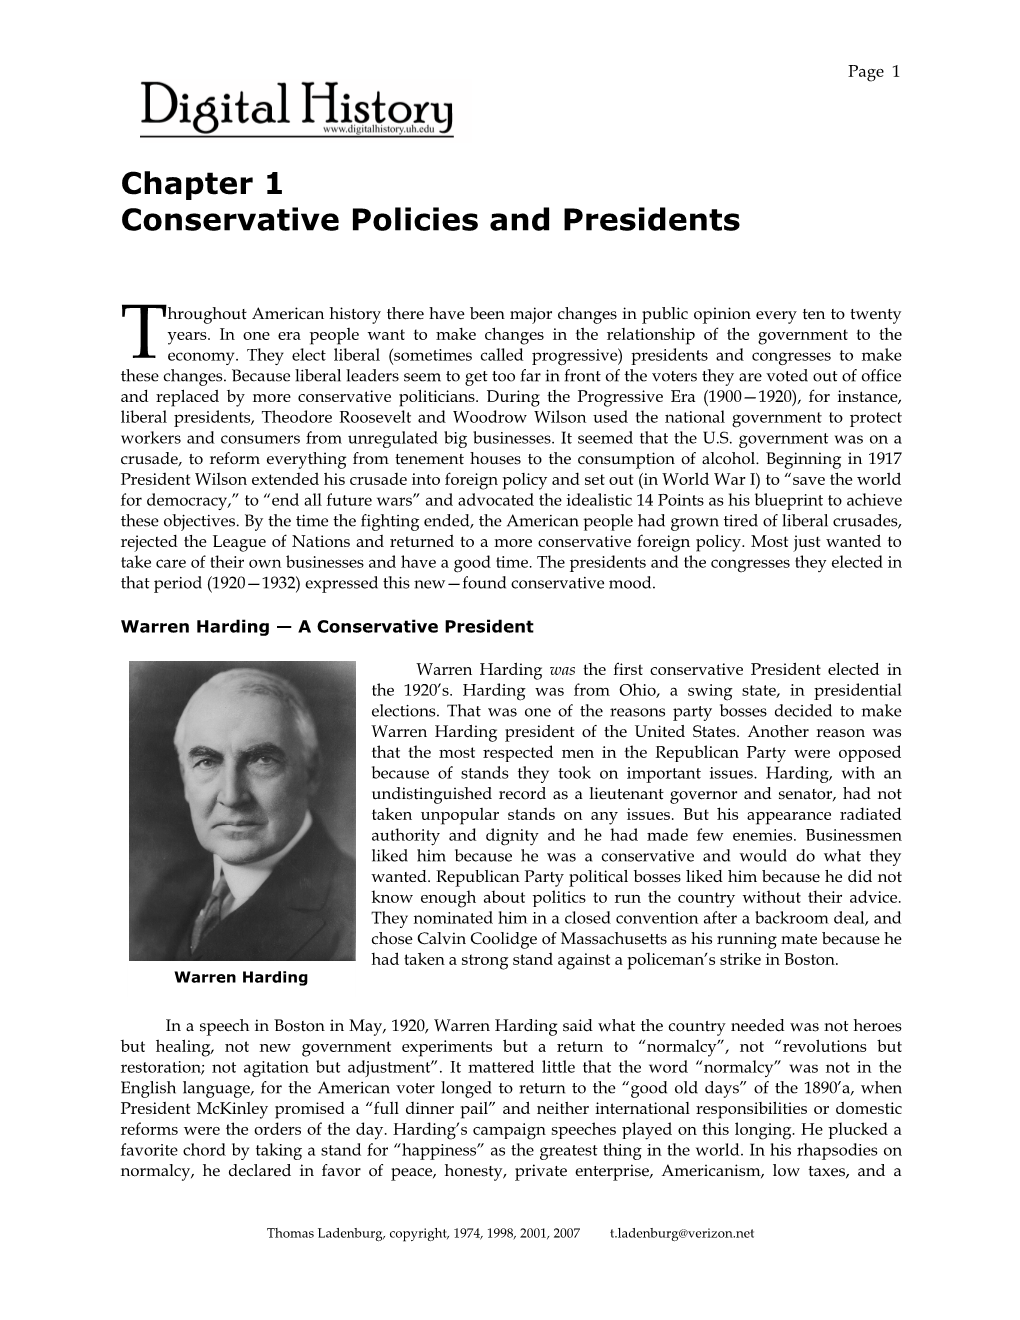 Chapter 1 Conservative Policies and Presidents